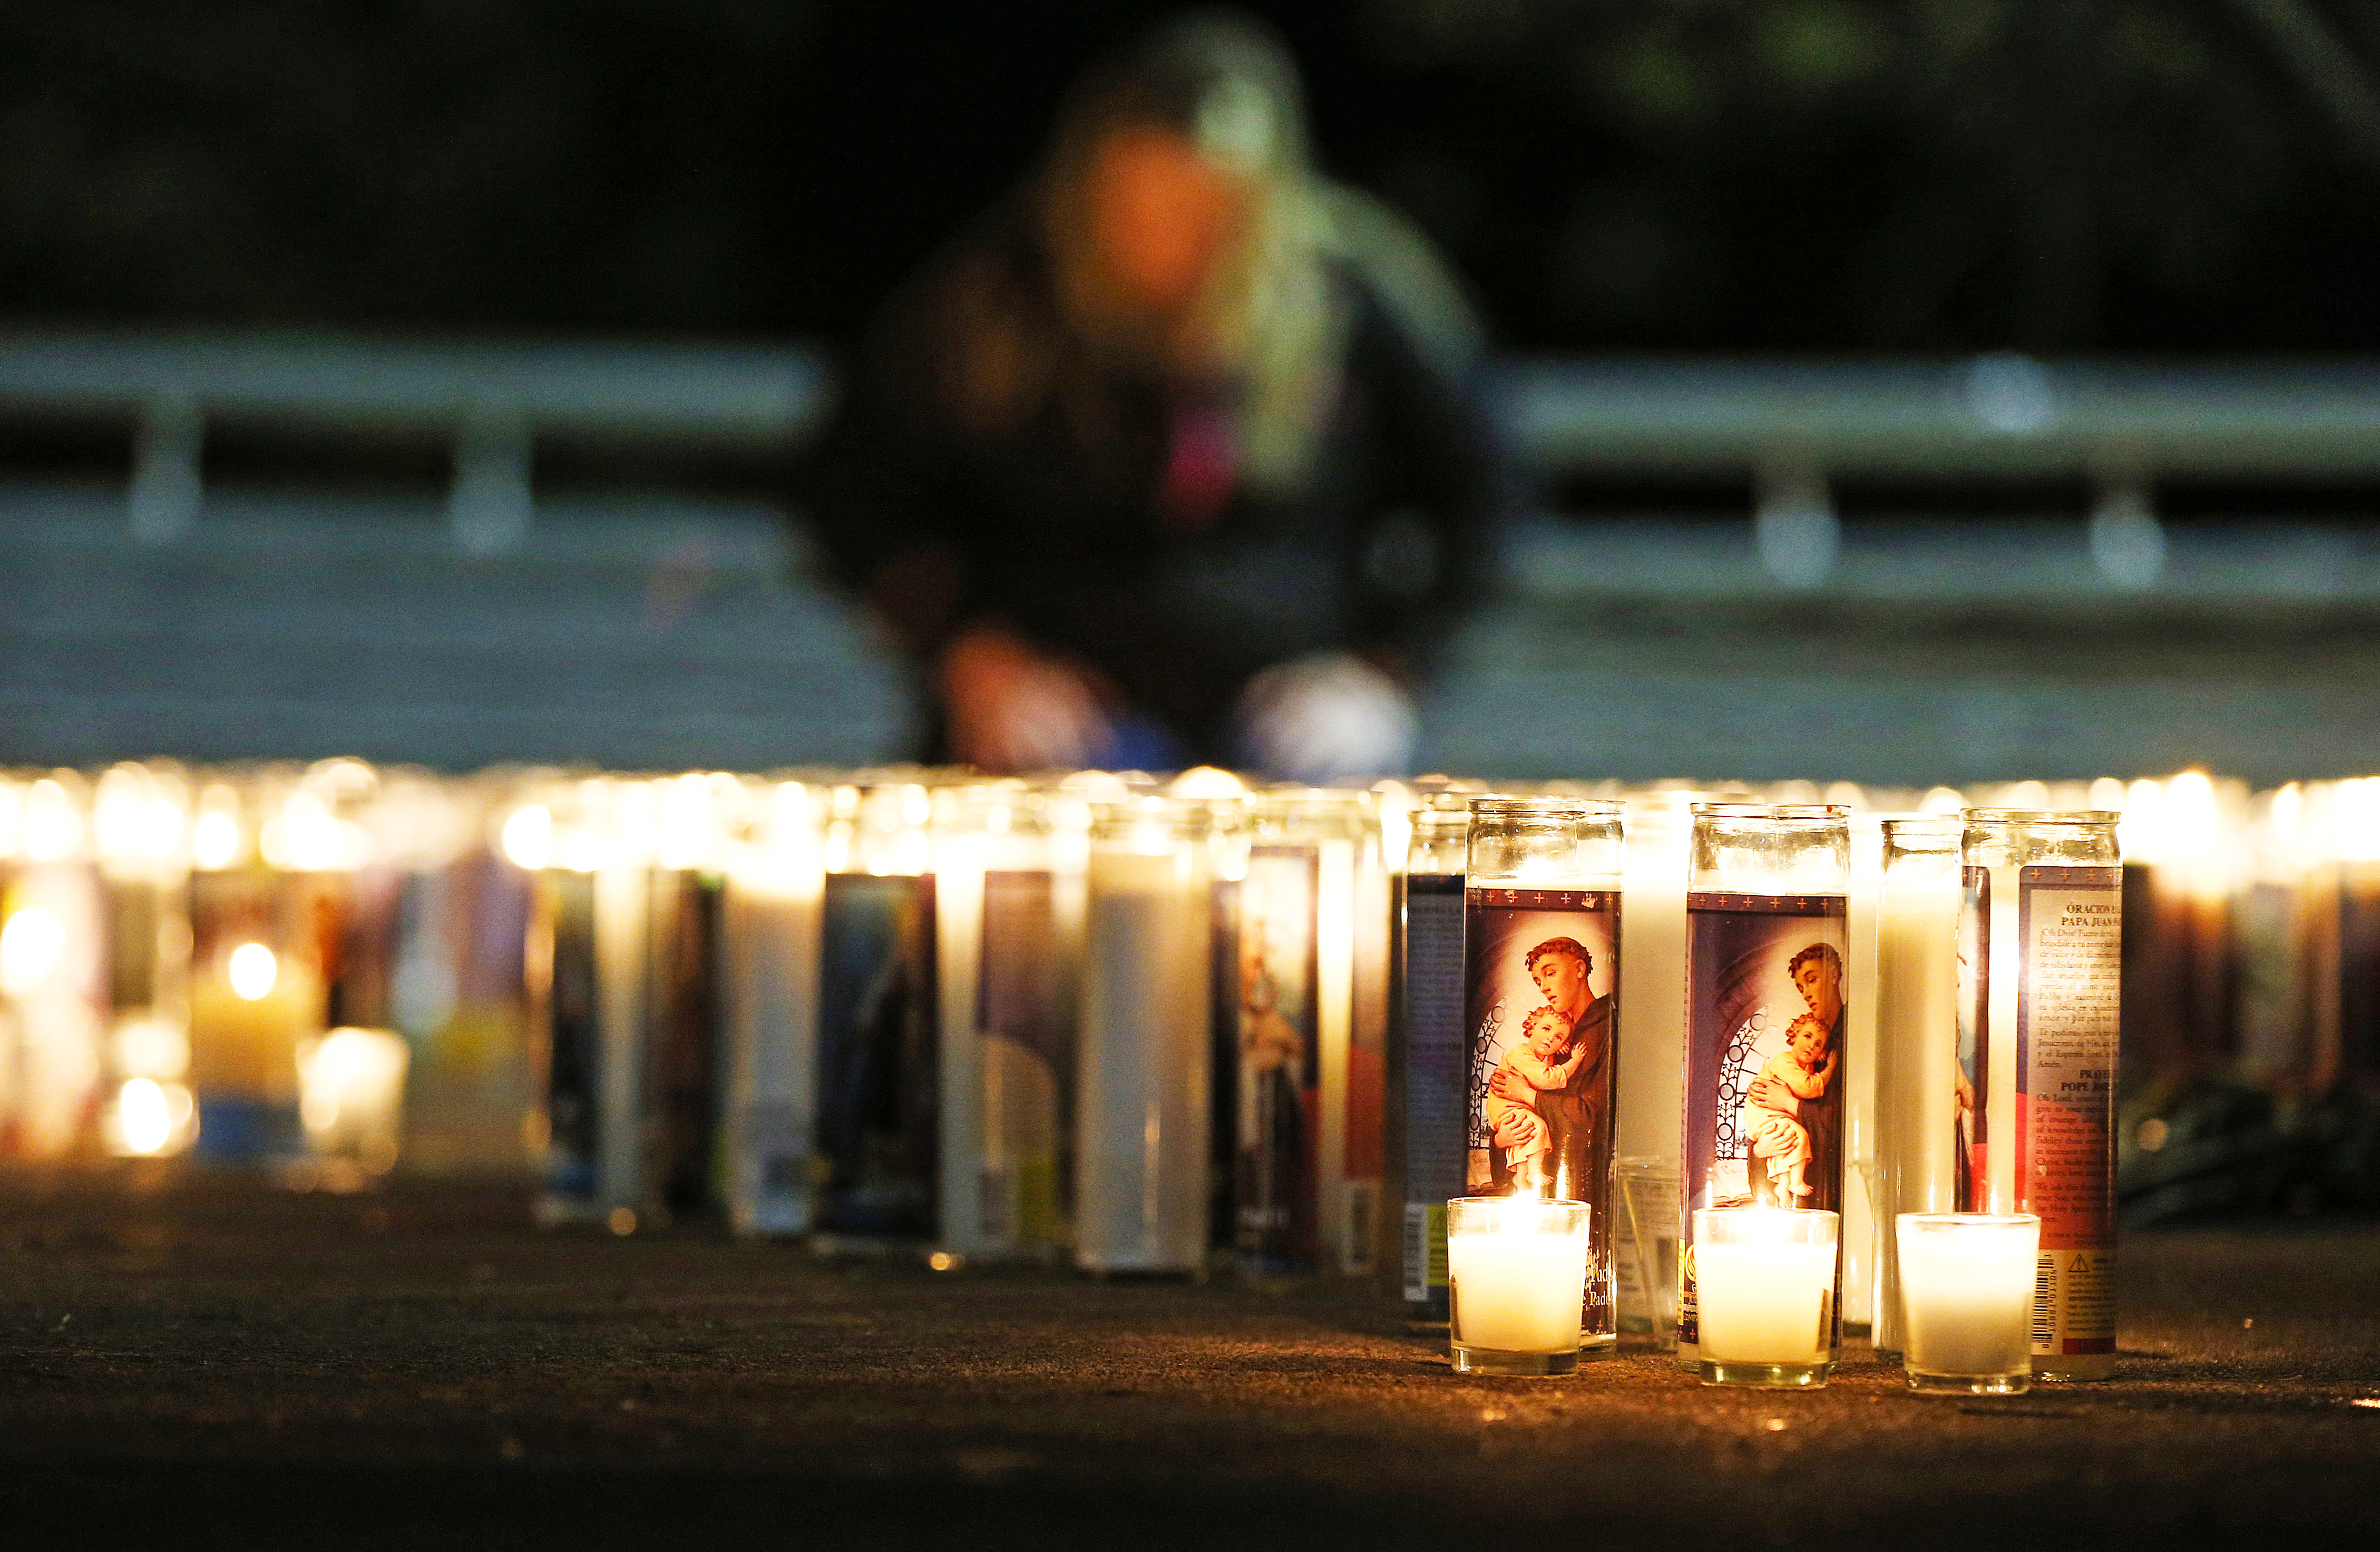 A memorial for victims of the Oregon shooting.